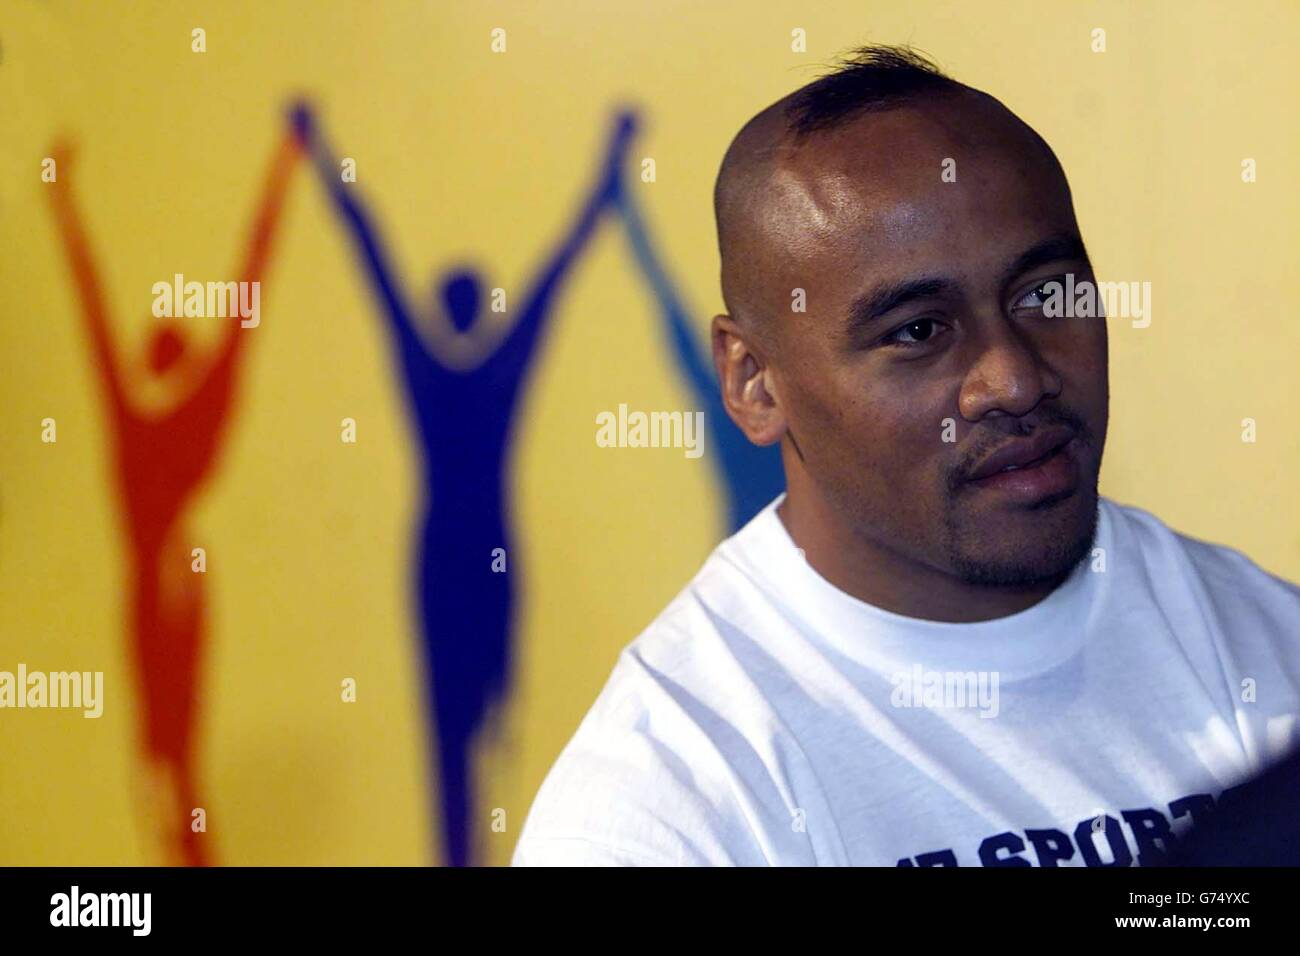 Jonah Lomu looks on whilst promoting the Commonwealth Game at The Printworks, Manchester. New Zealand All Blacks' Jonah Lomu took on former Olympic gold medalist Linford Christie in a head-to-head 50 metre sprint. * as part of the countdown towards the 2002 Commonwealth Games. Linford won the race against Jonah. Stock Photo